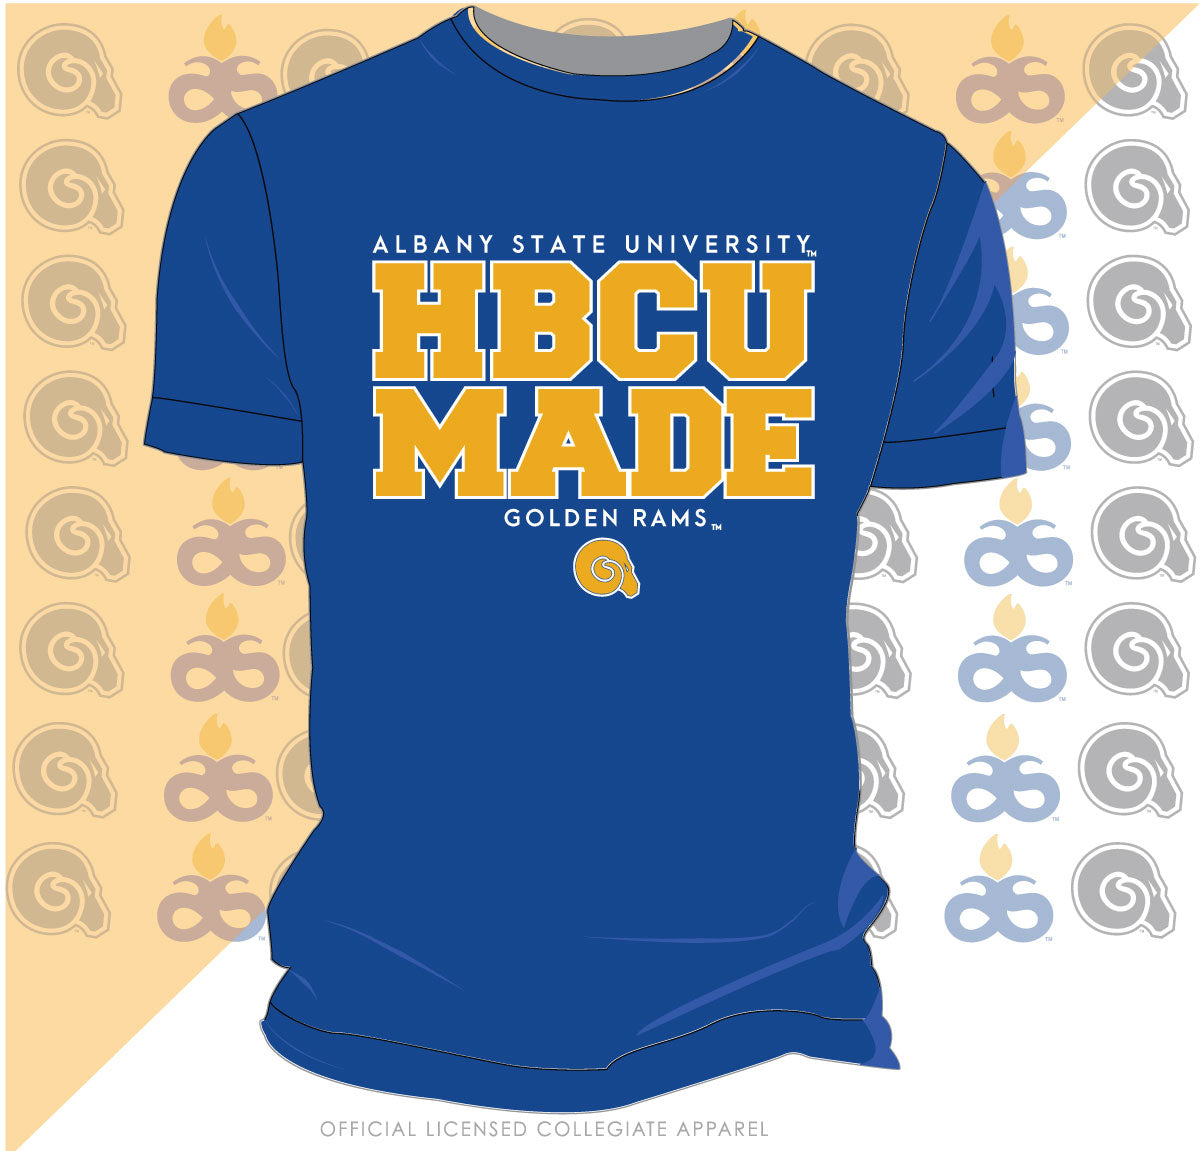 ALBANY ST. | HBCU MADE Royal Blue Unisex Tees -Z-